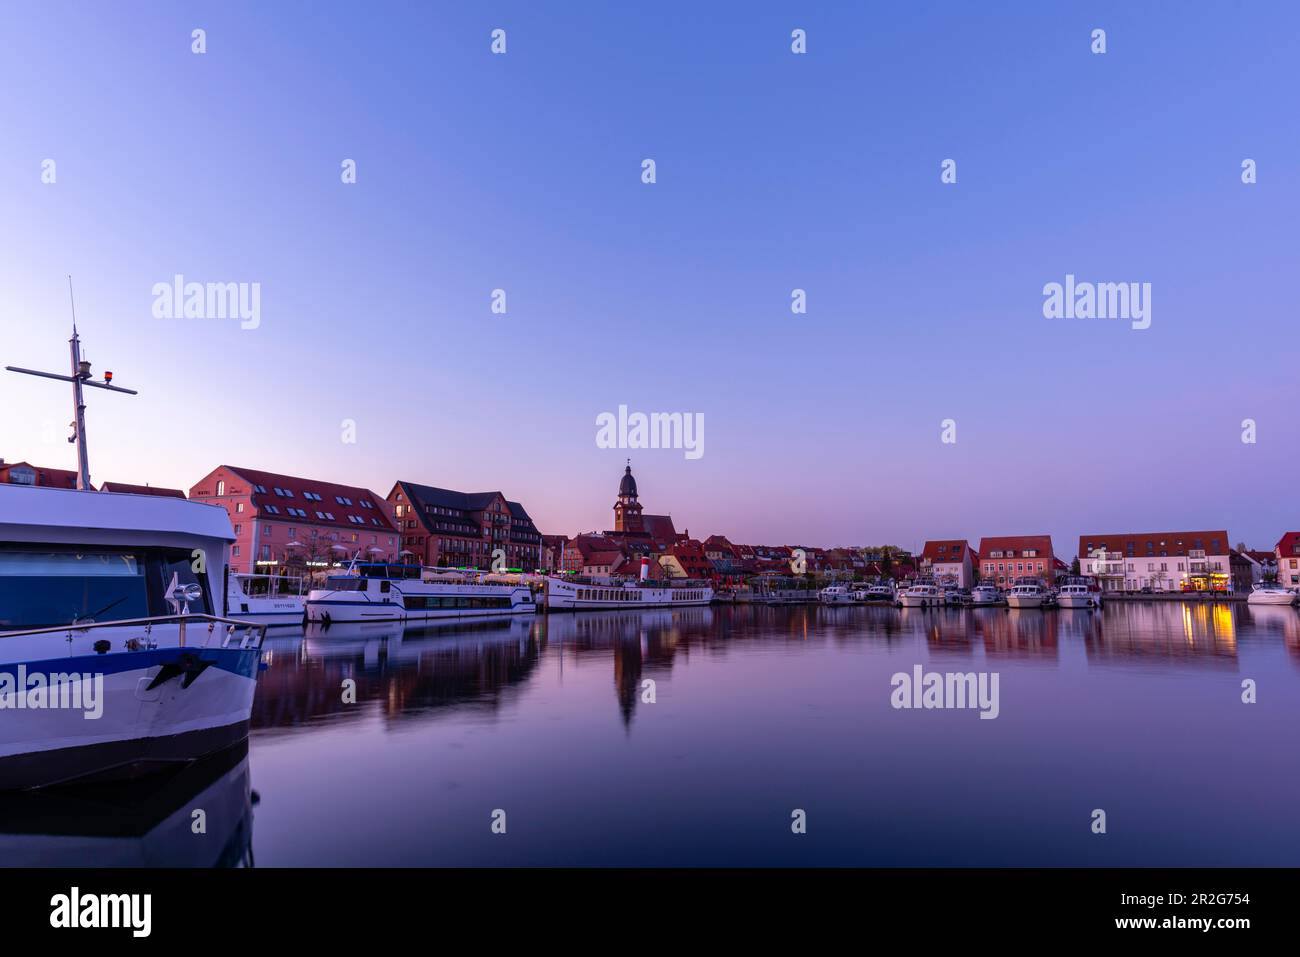 Town harbour of the small town of Waren in the evening light, Mueritz, inland Mueritz, Mecklemburg Lake District, boats, St. Mary's Church Stock Photo